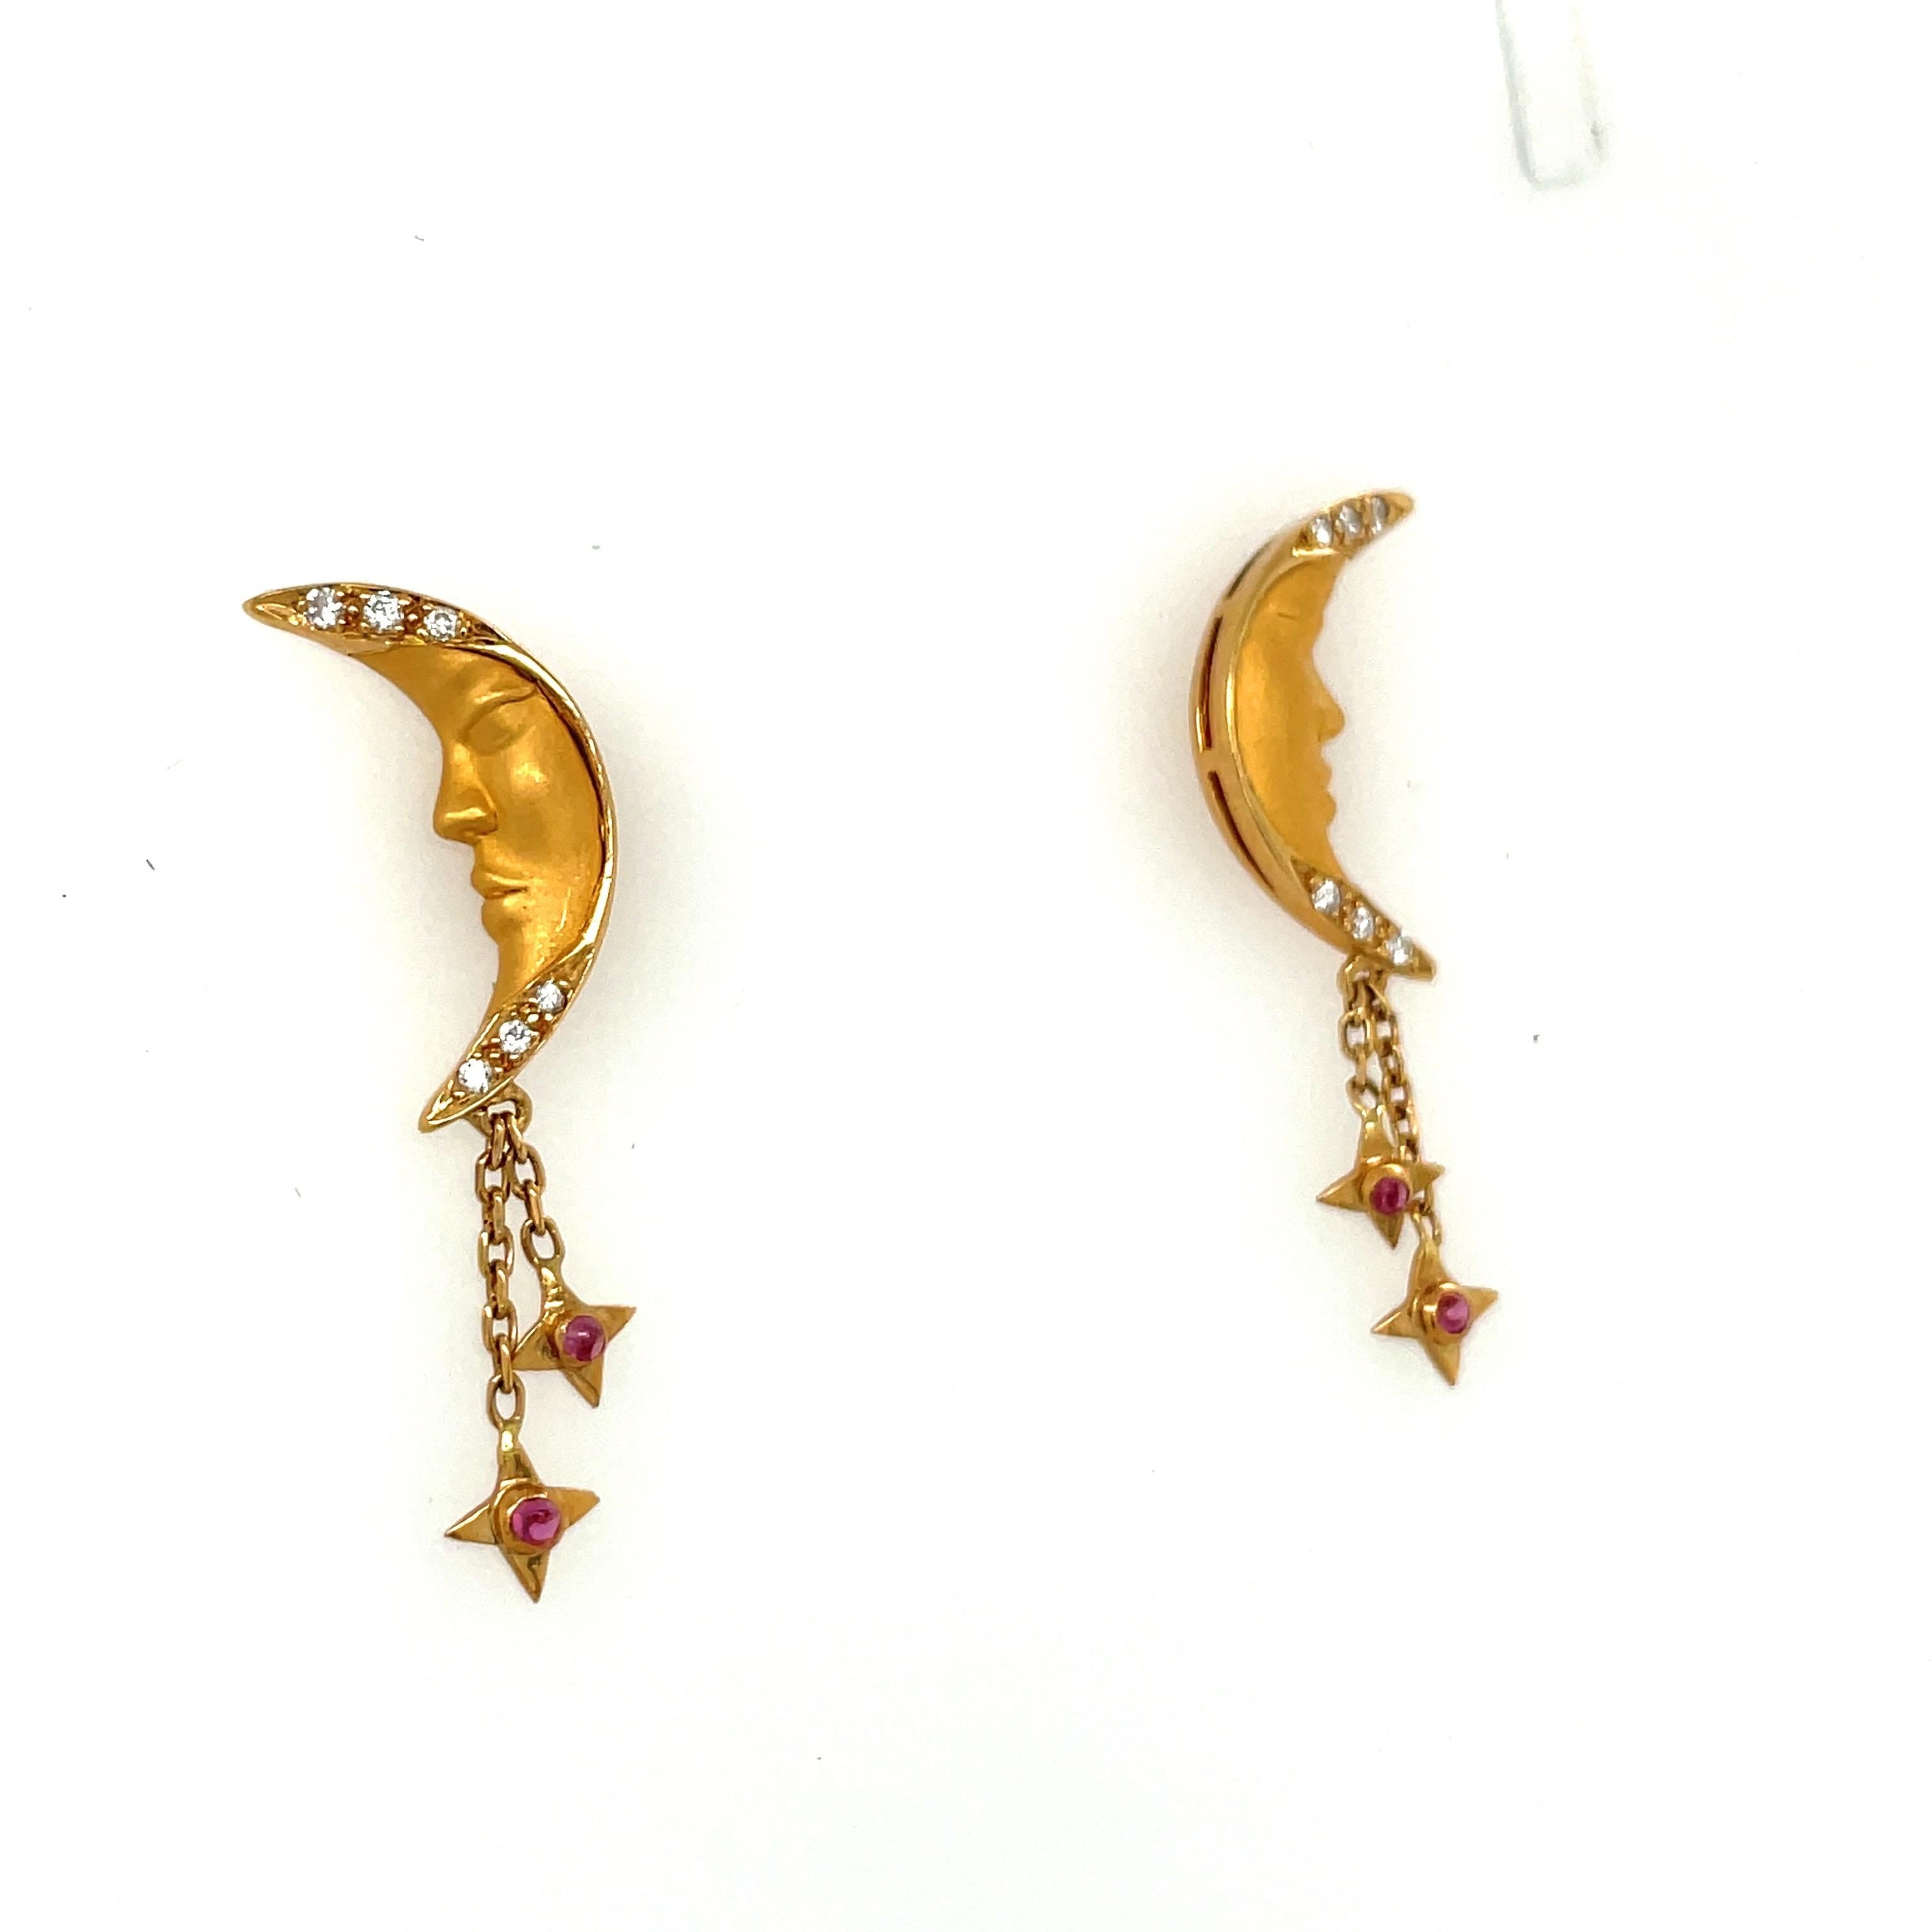 Women's or Men's Carrera Y Carrera 18KT Yellow Gold Crescent Moon Earrings with Diamond & Ruby